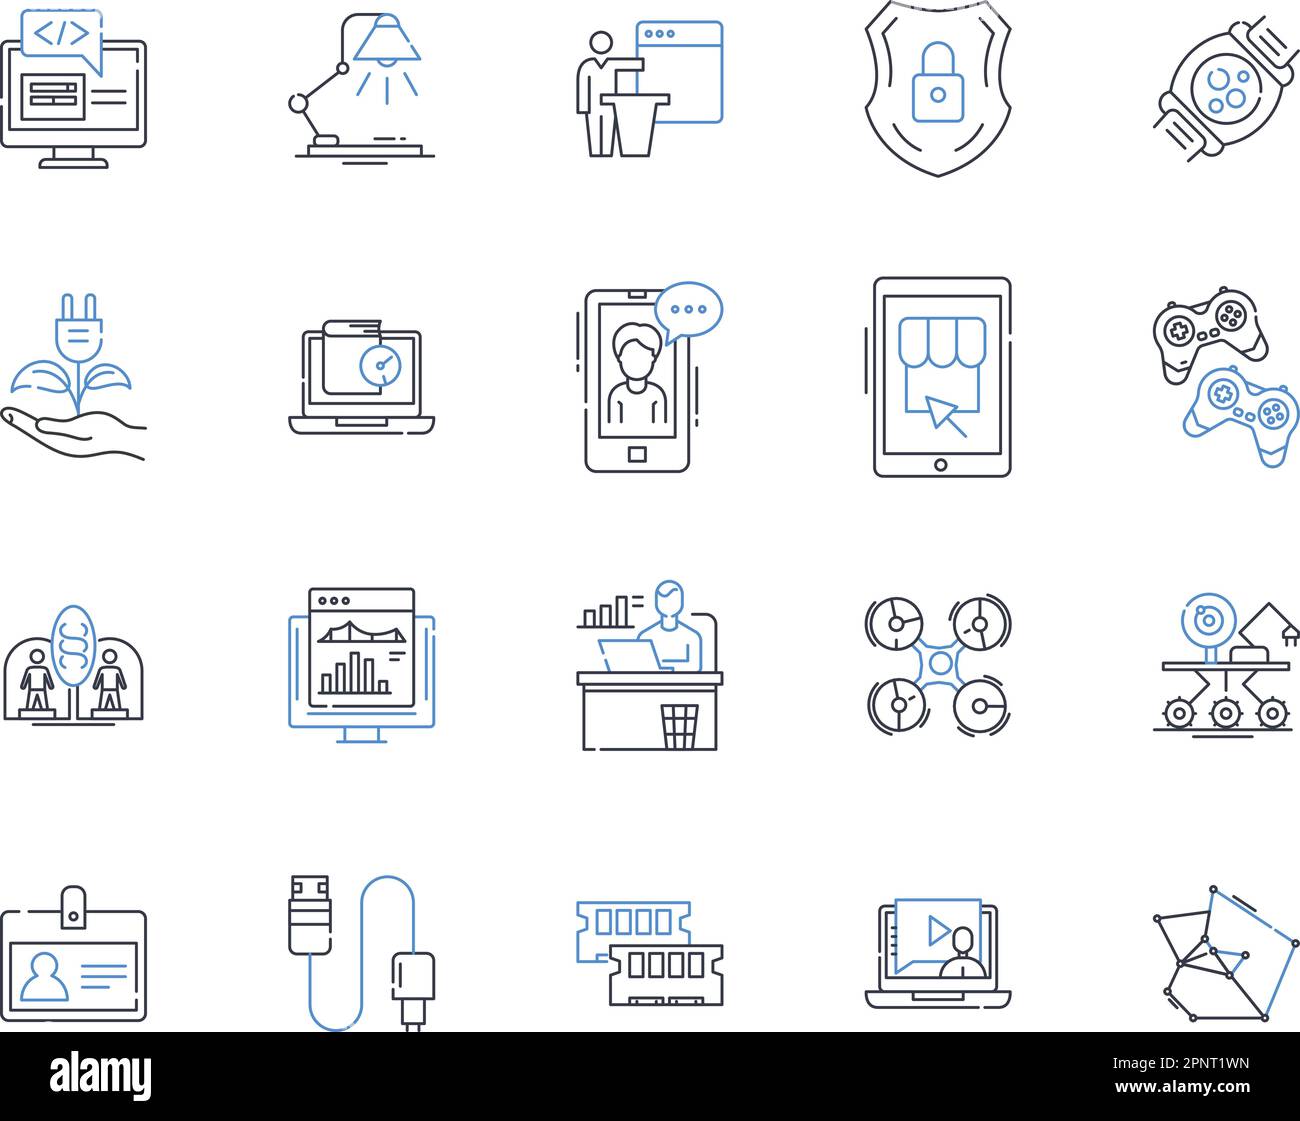 Multimedia devices line icons collection. Smartphs, Tablets, Laptops, Desktops, Smart TVs, Game Consoles, Projectors vector and linear illustration Stock Vector